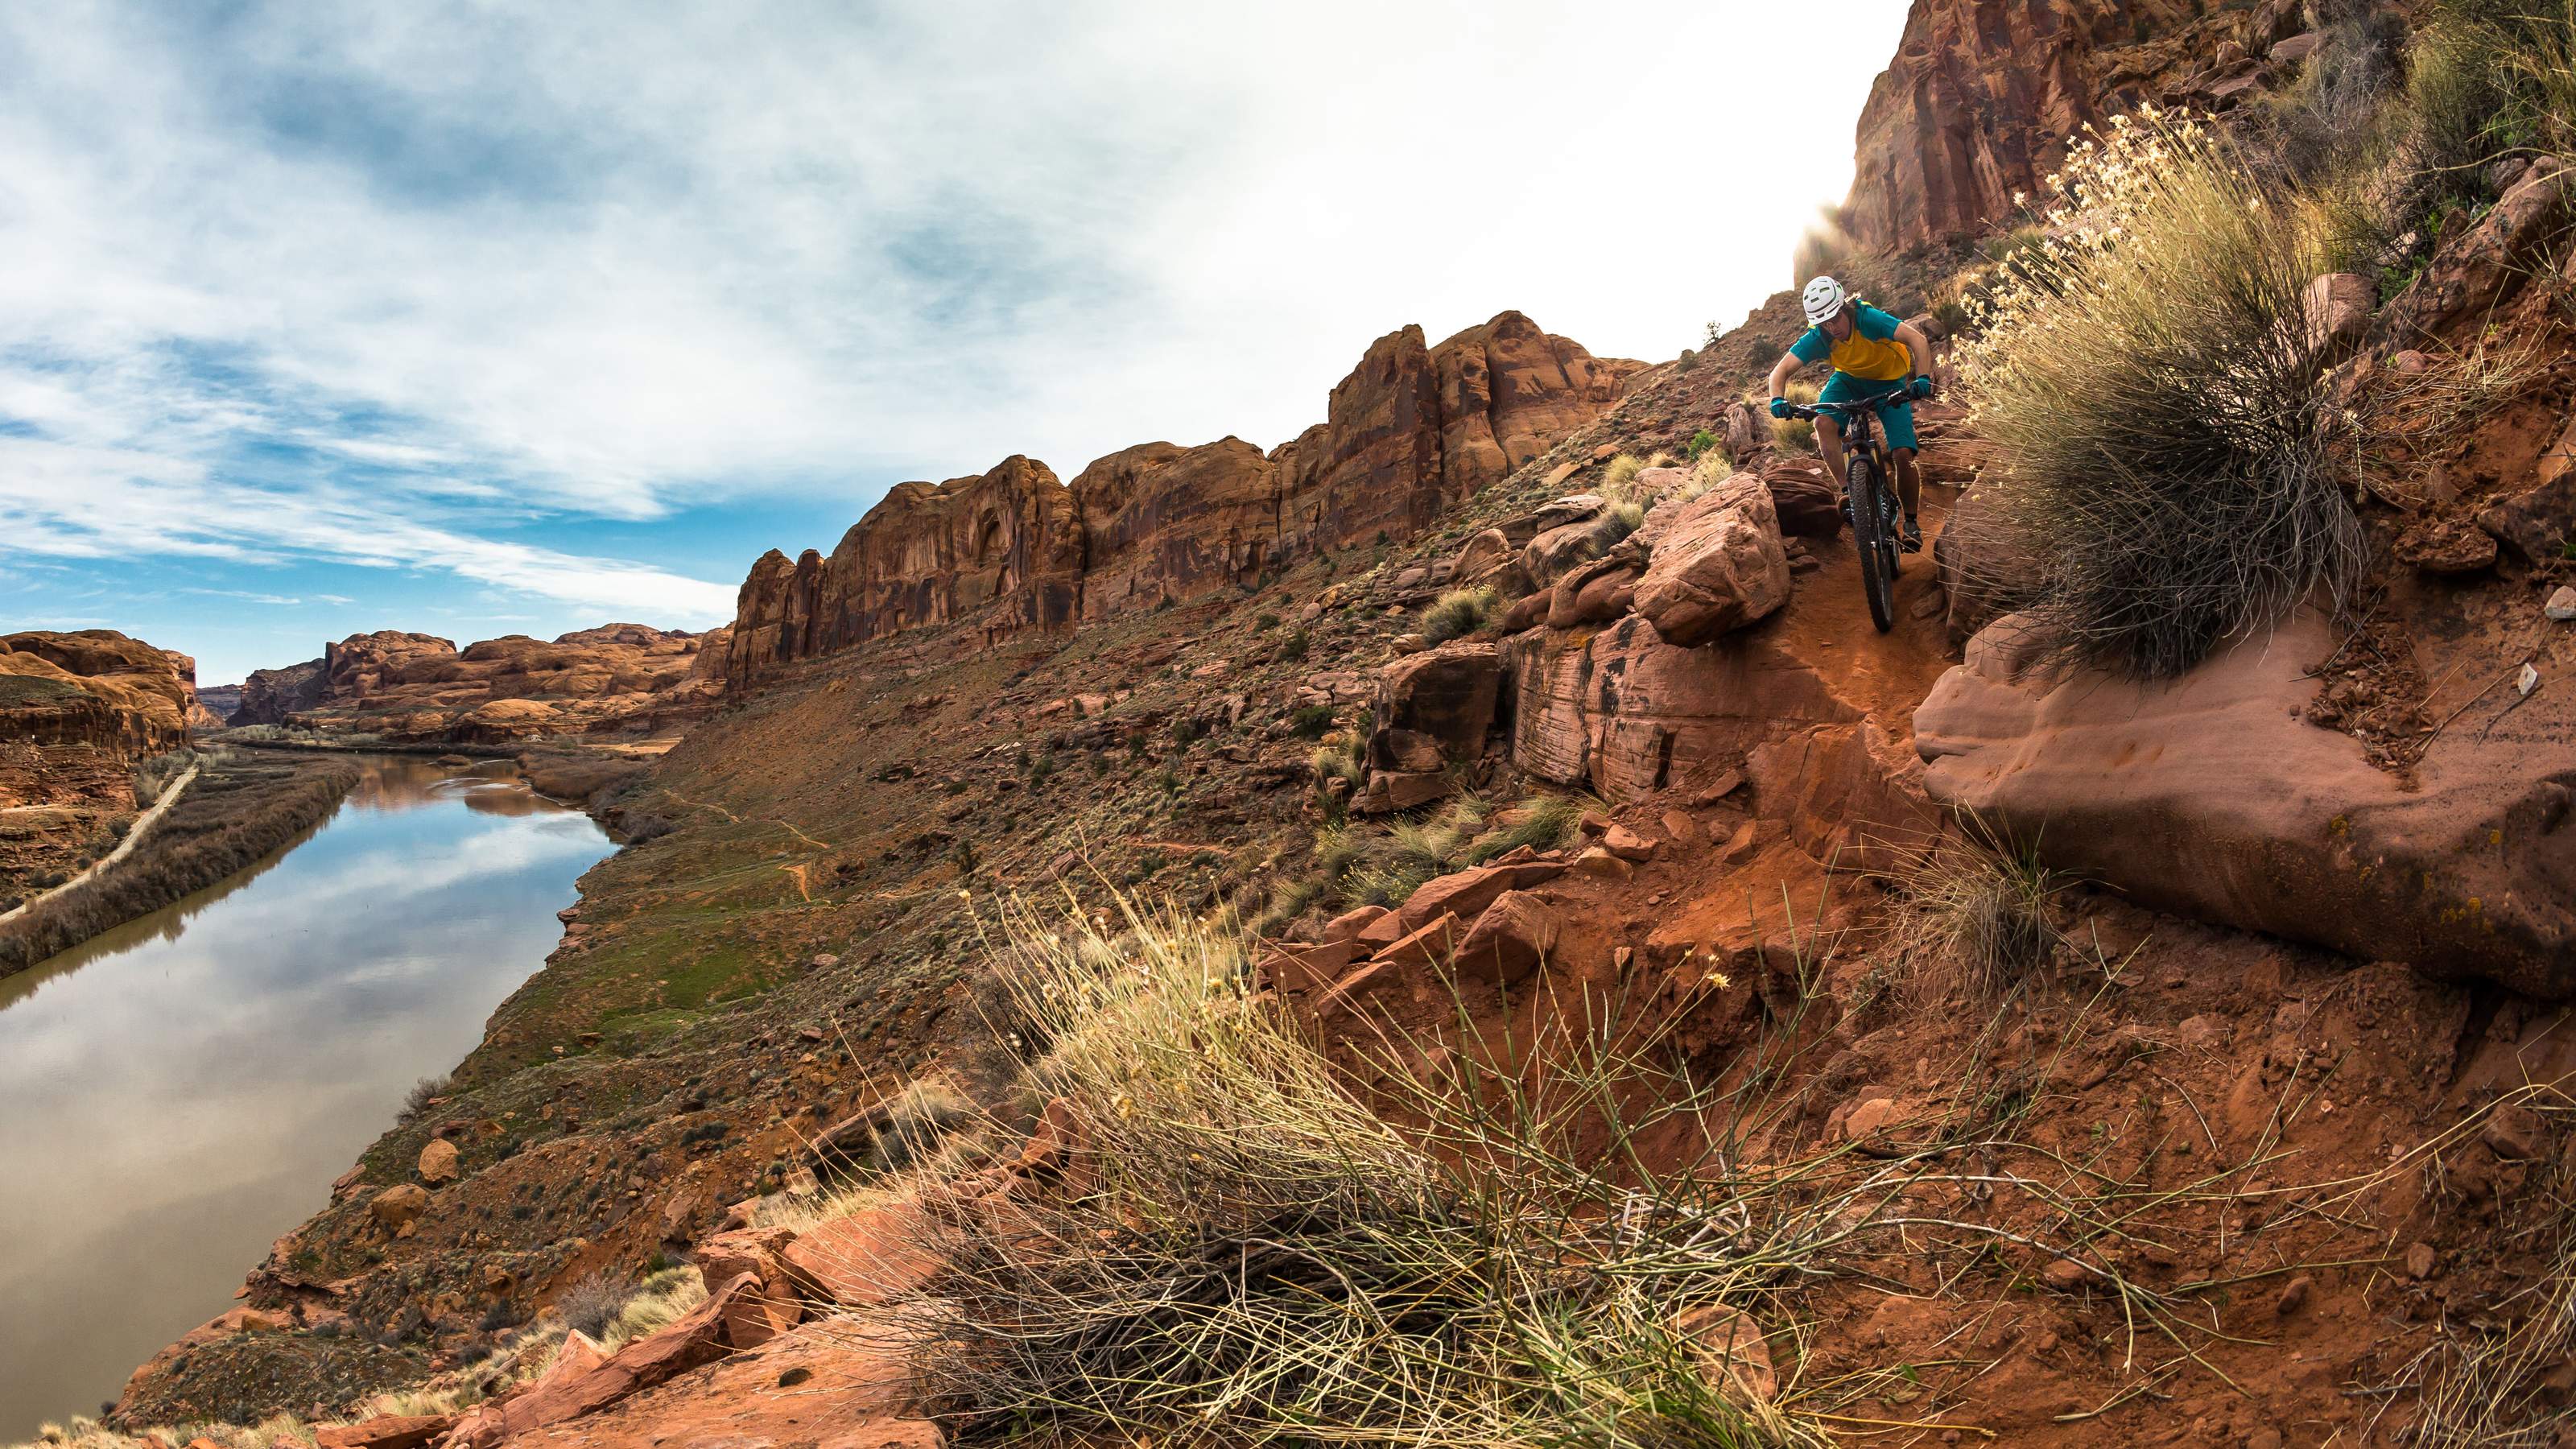 Yeti Cycles’ Southwest – Ride along on some of the most scenic trails the Southwest has to offer